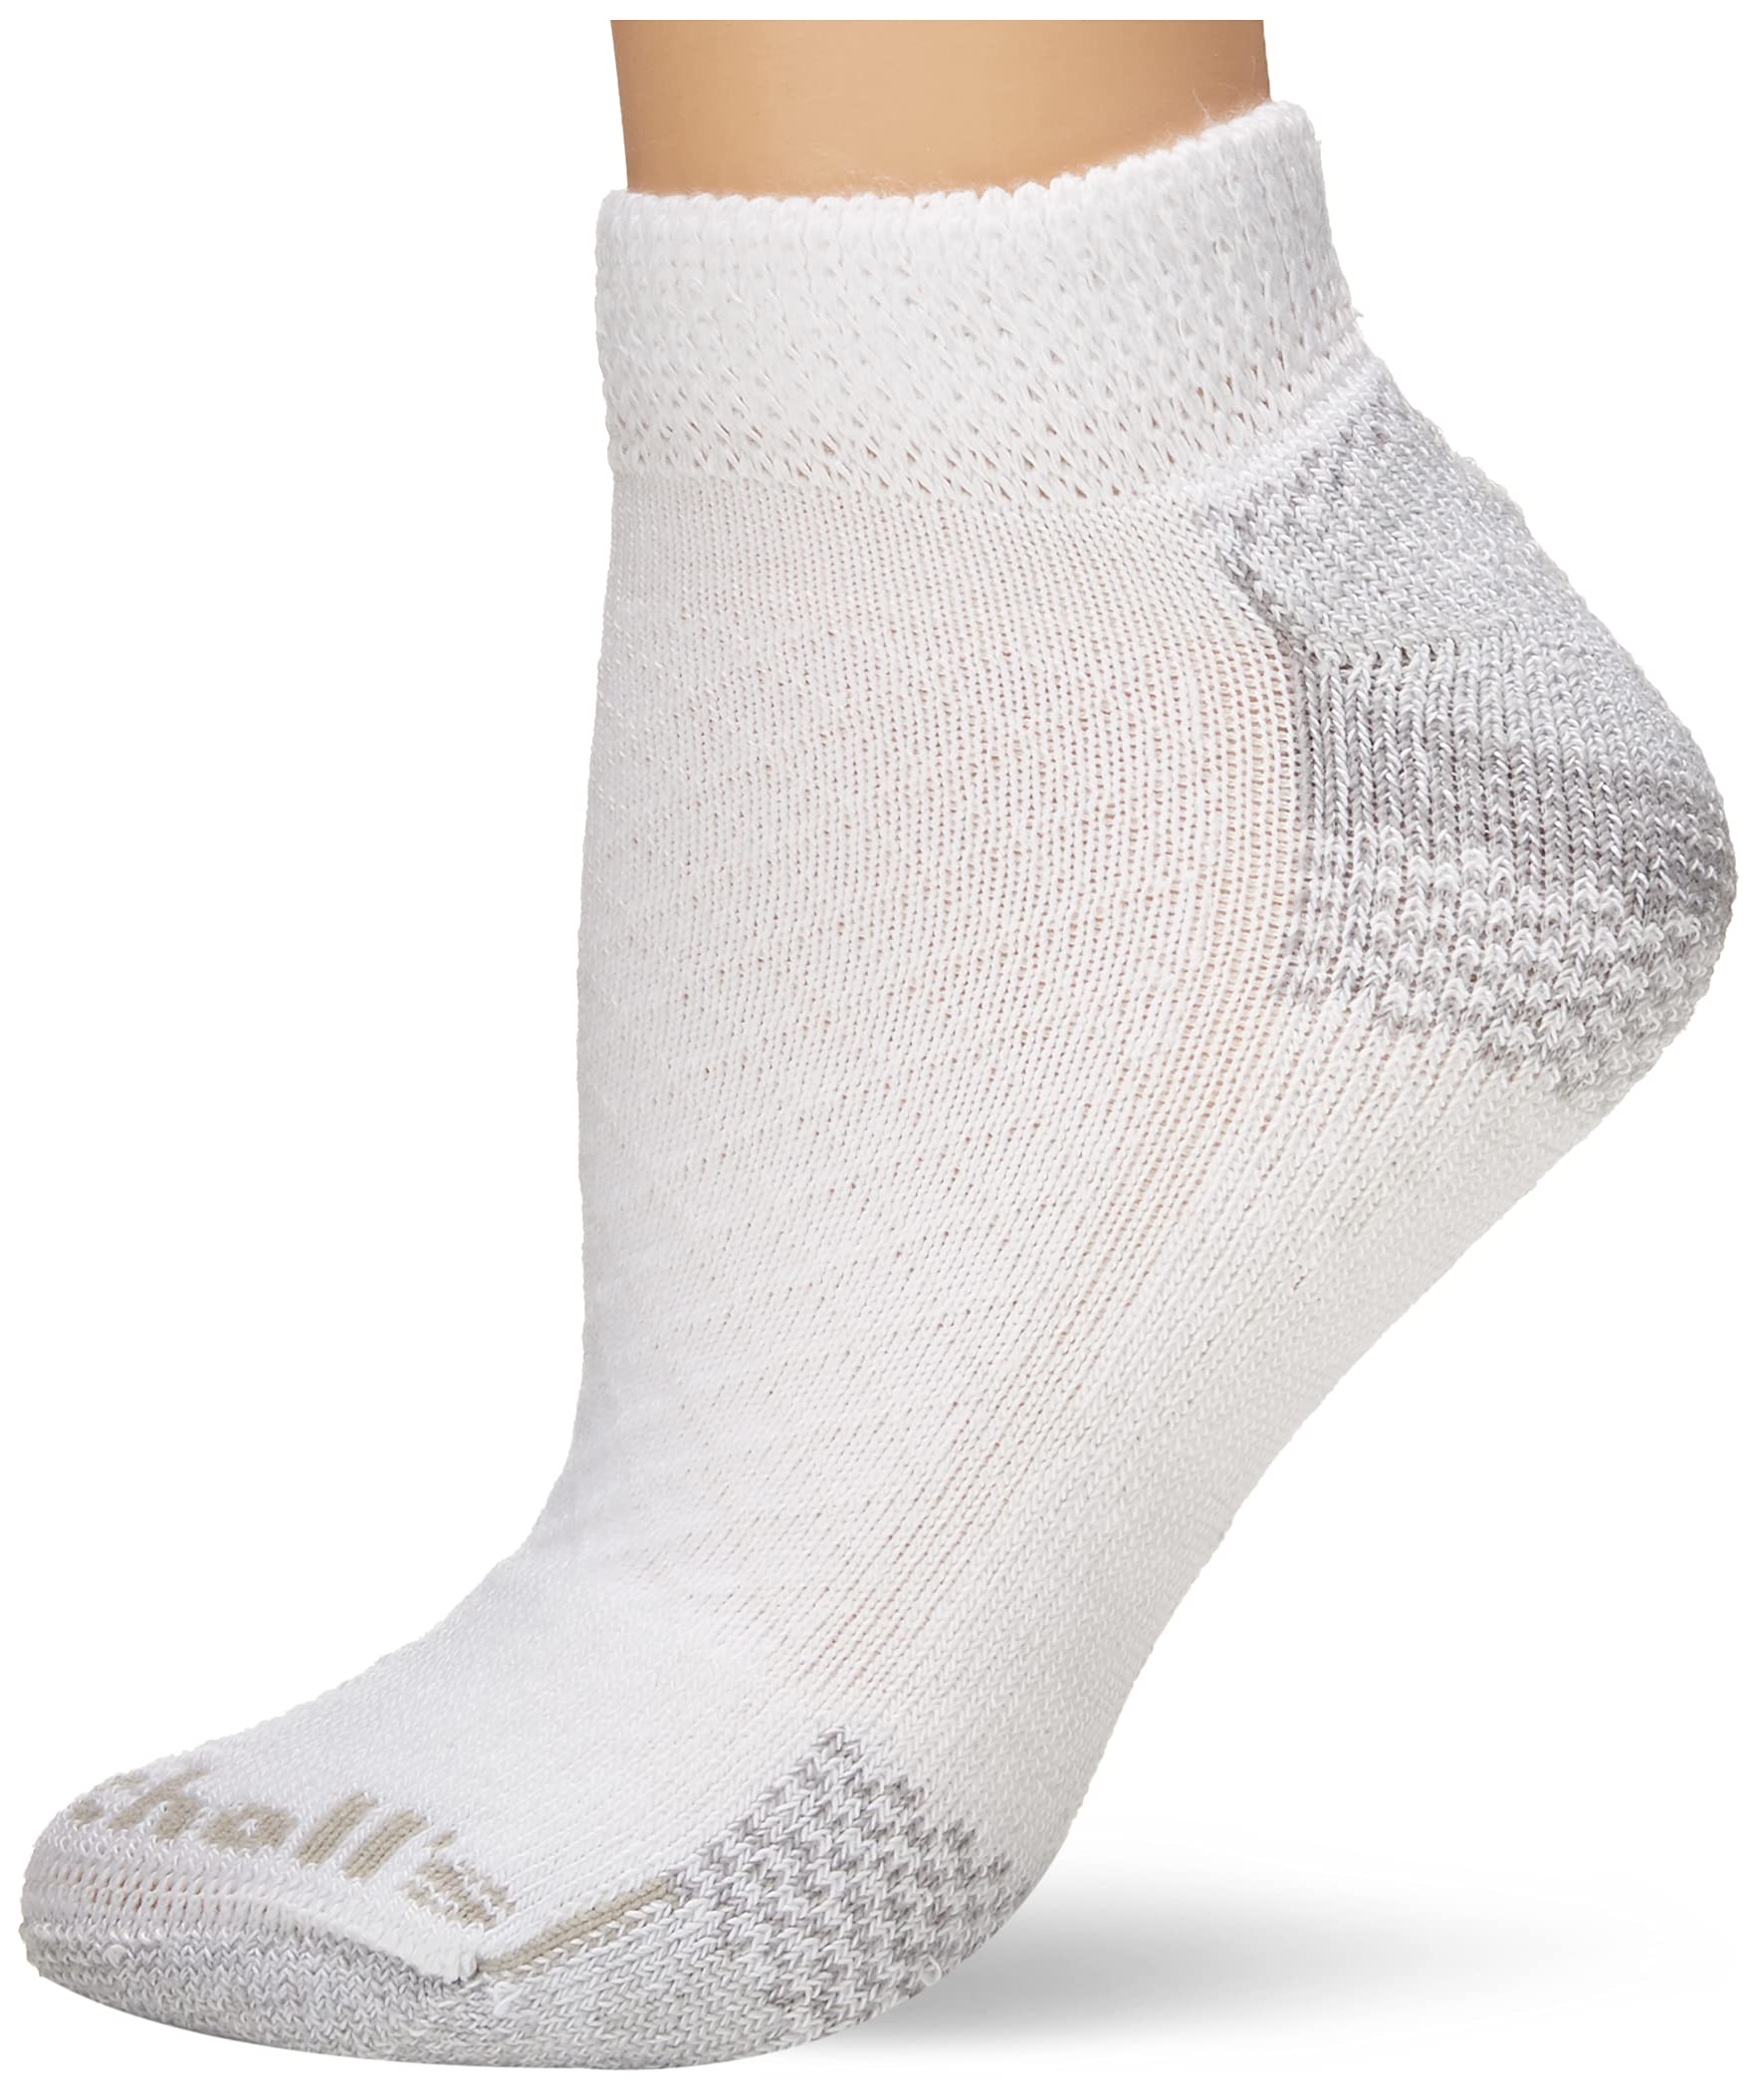 2-Pairs Dr. Scholl's Women's Advanced Relief Blisterguard Low Cut Socks (4-10, White) $2.95 ($1.48 each pair) + Free Shipping w/ Prime or $25+